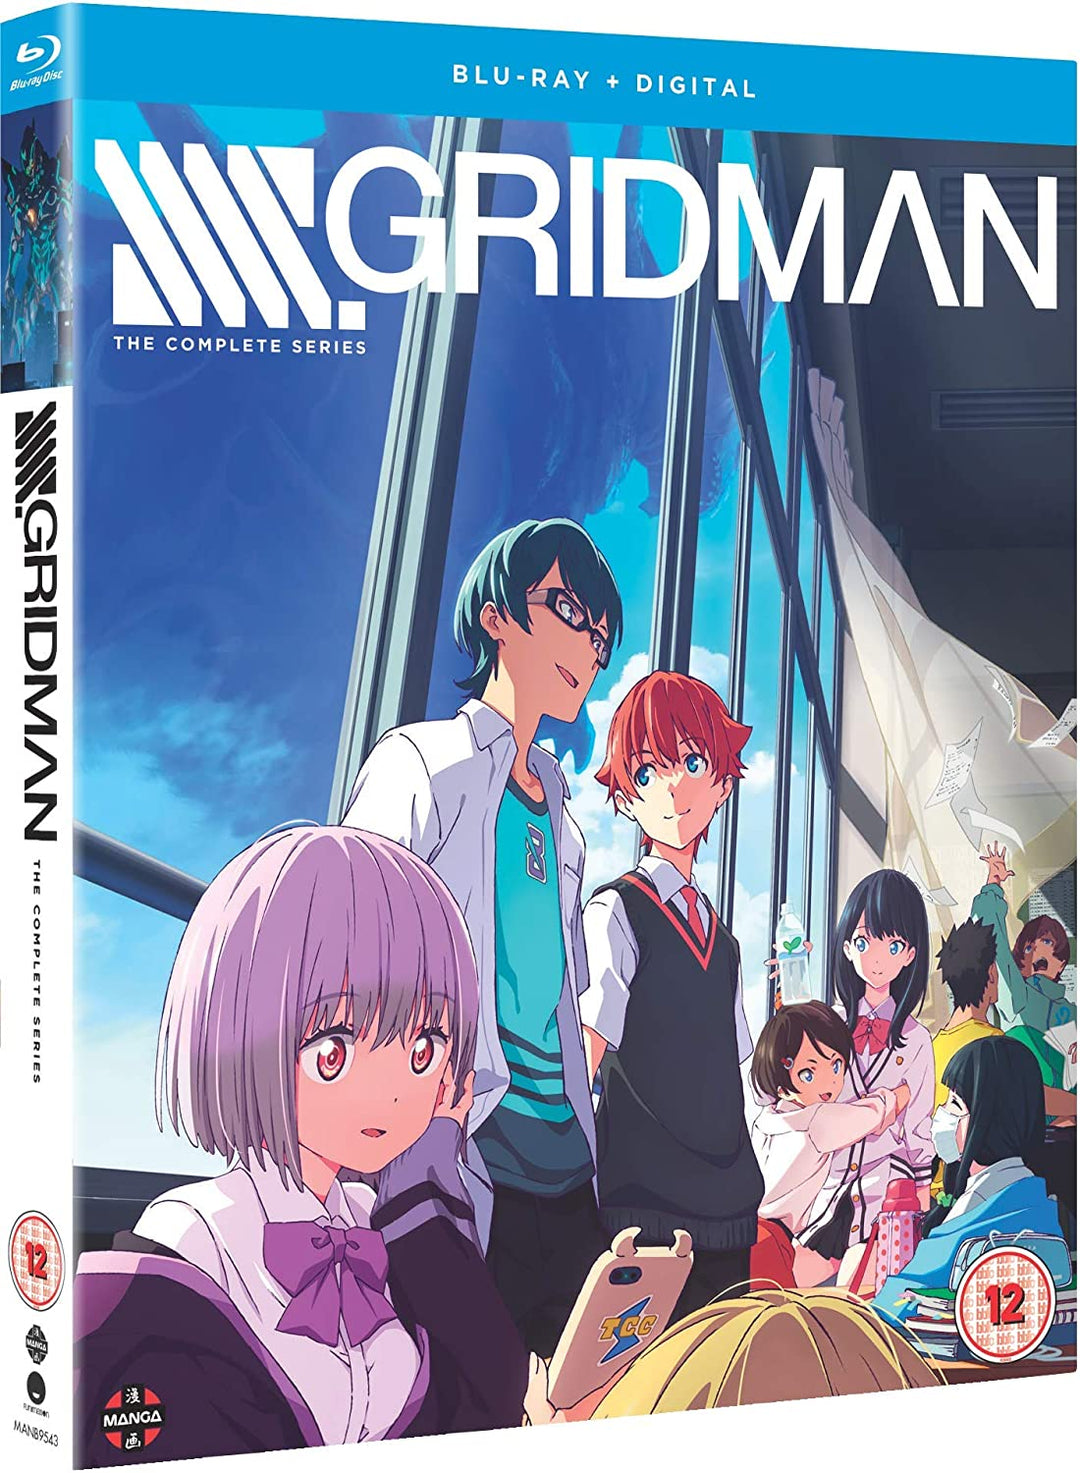 SSSS.GRIDMAN: The Complete Series [Blu-ray]